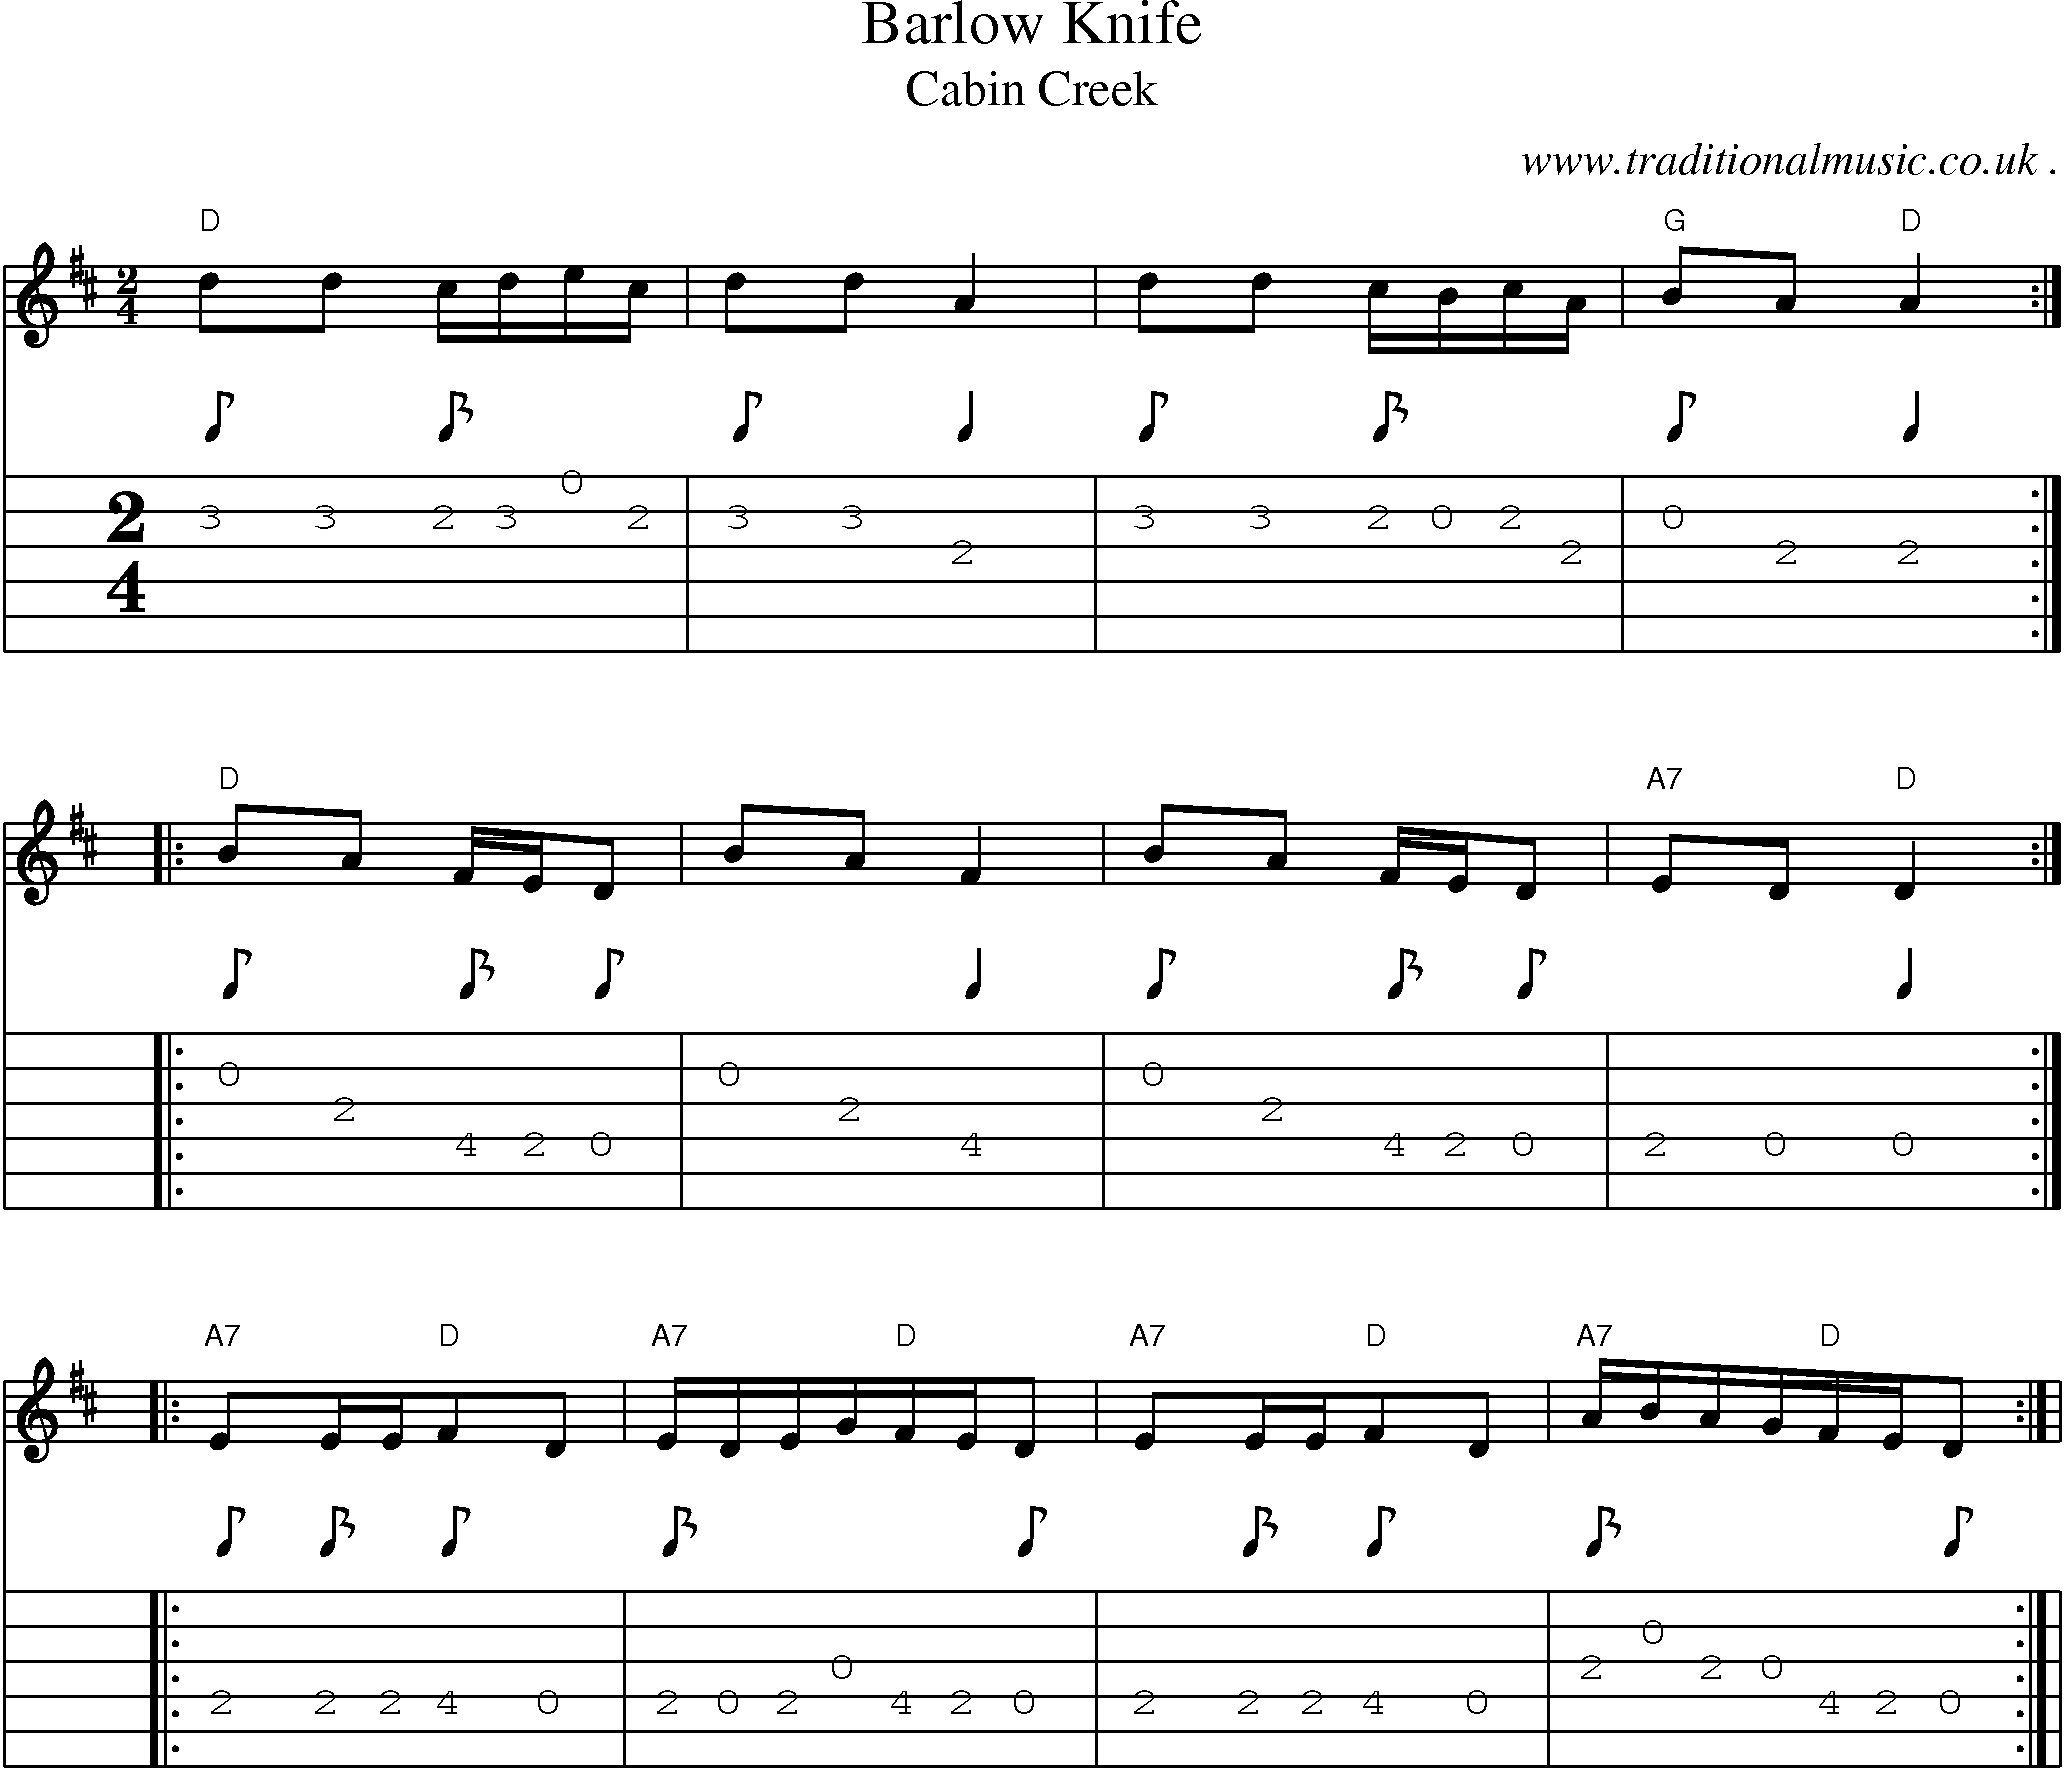 Sheet-Music and Guitar Tabs for Barlow Knife